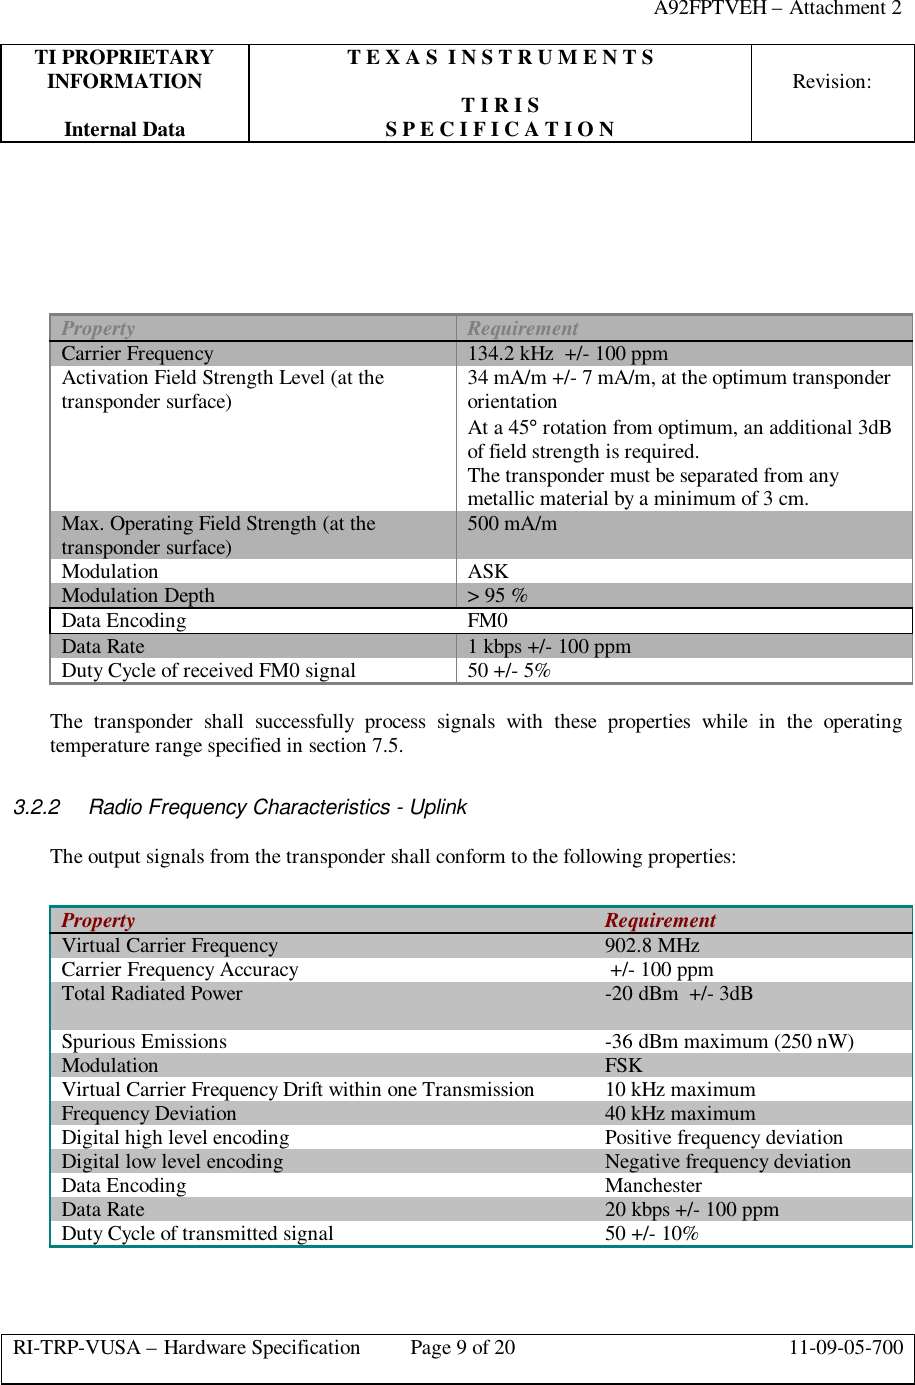 A92FPTVEH – Attachment 2TI PROPRIETARY T E X A S  I N S T R U M E N T SINFORMATION Revision:T I R I SInternal Data S P E C I F I C A T I O NRI-TRP-VUSA – Hardware Specification Page 9 of 20 11-09-05-700Property RequirementCarrier Frequency 134.2 kHz  +/- 100 ppmActivation Field Strength Level (at thetransponder surface) 34 mA/m +/- 7 mA/m, at the optimum transponderorientationAt a 45° rotation from optimum, an additional 3dBof field strength is required.The transponder must be separated from anymetallic material by a minimum of 3 cm.Max. Operating Field Strength (at thetransponder surface) 500 mA/mModulation ASKModulation Depth &gt; 95 %Data Encoding FM0Data Rate 1 kbps +/- 100 ppmDuty Cycle of received FM0 signal 50 +/- 5%The transponder shall successfully process signals with these properties while in the operatingtemperature range specified in section 7.5.3.2.2 Radio Frequency Characteristics - UplinkThe output signals from the transponder shall conform to the following properties:Property RequirementVirtual Carrier Frequency 902.8 MHzCarrier Frequency Accuracy  +/- 100 ppmTotal Radiated Power -20 dBm  +/- 3dBSpurious Emissions -36 dBm maximum (250 nW)Modulation FSKVirtual Carrier Frequency Drift within one Transmission 10 kHz maximumFrequency Deviation 40 kHz maximumDigital high level encoding Positive frequency deviationDigital low level encoding Negative frequency deviationData Encoding ManchesterData Rate 20 kbps +/- 100 ppmDuty Cycle of transmitted signal 50 +/- 10%